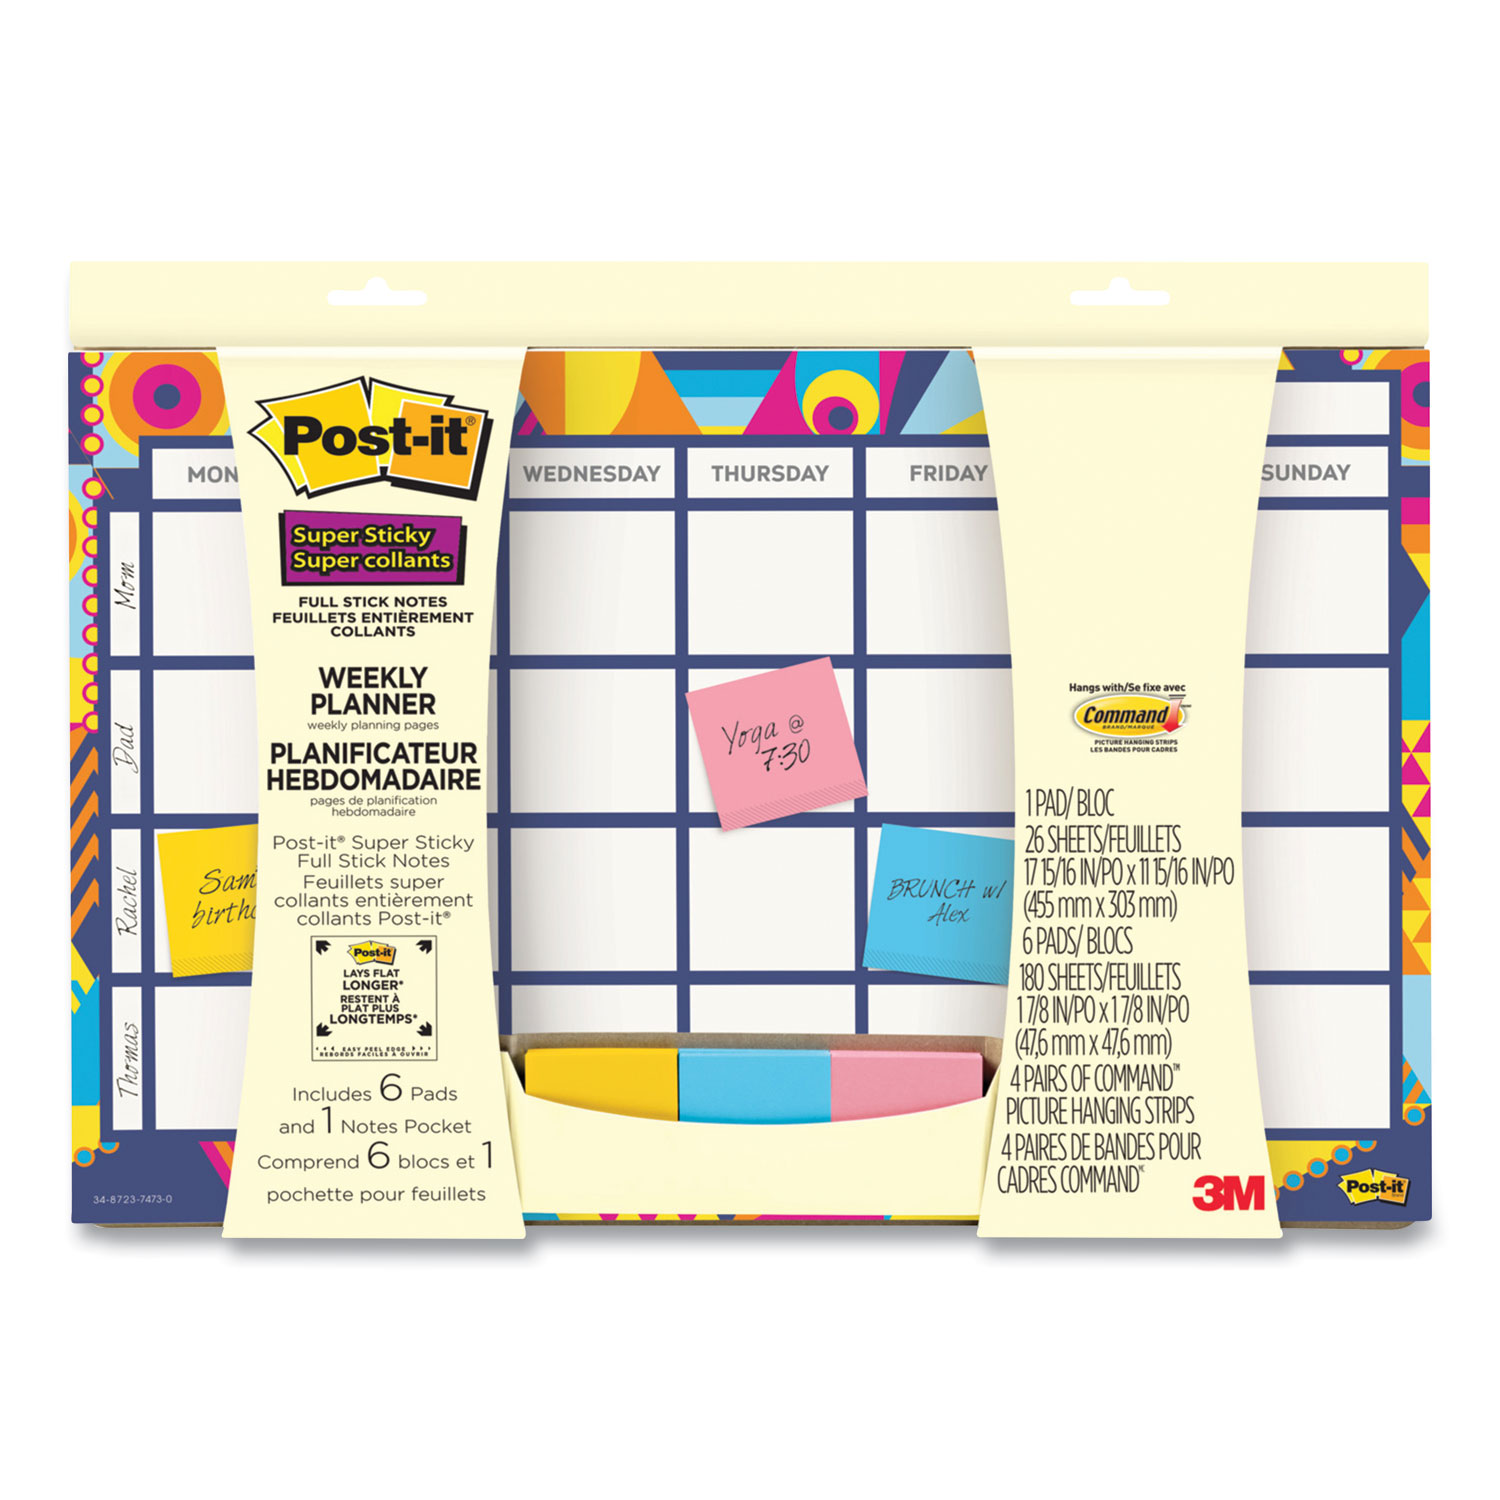 Post-it® Weekly Planner with Post-it Super Sticky Notes, 18 x 12, Undated